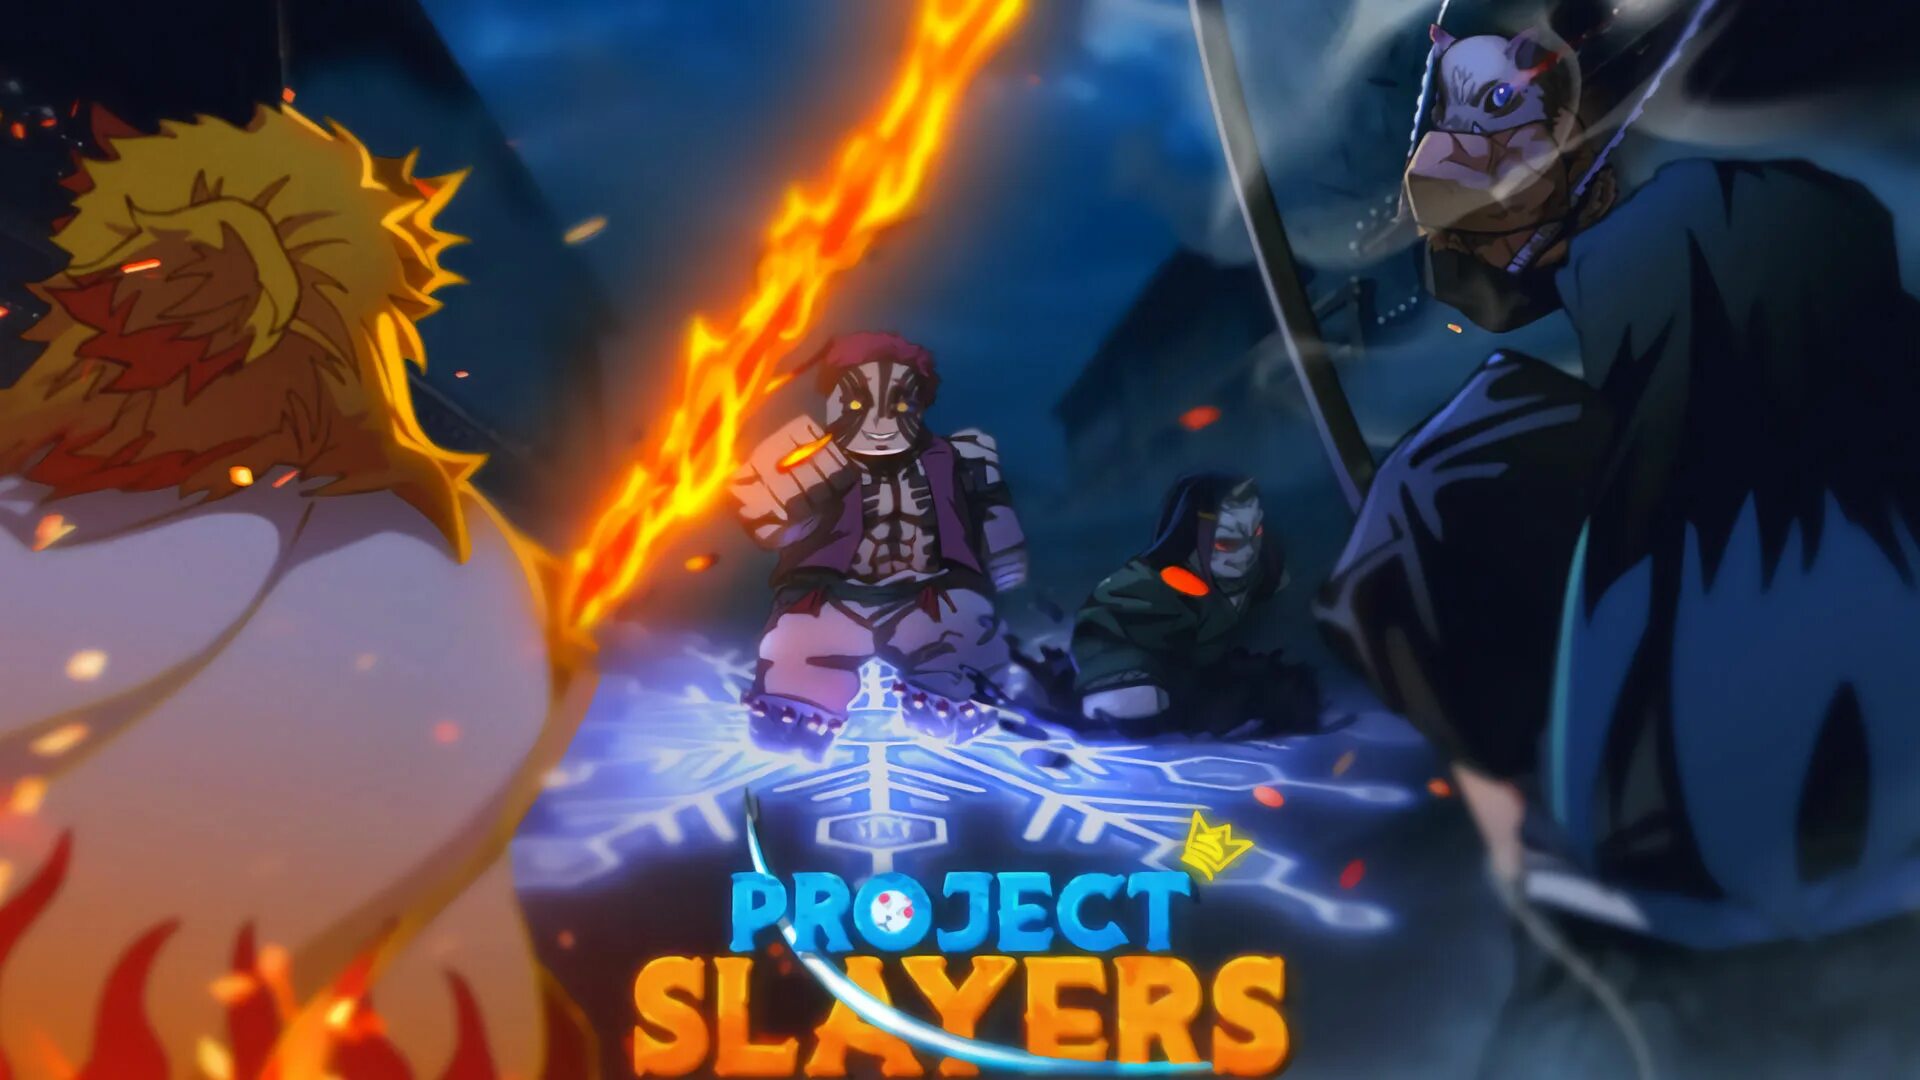 Project slayers 1.5